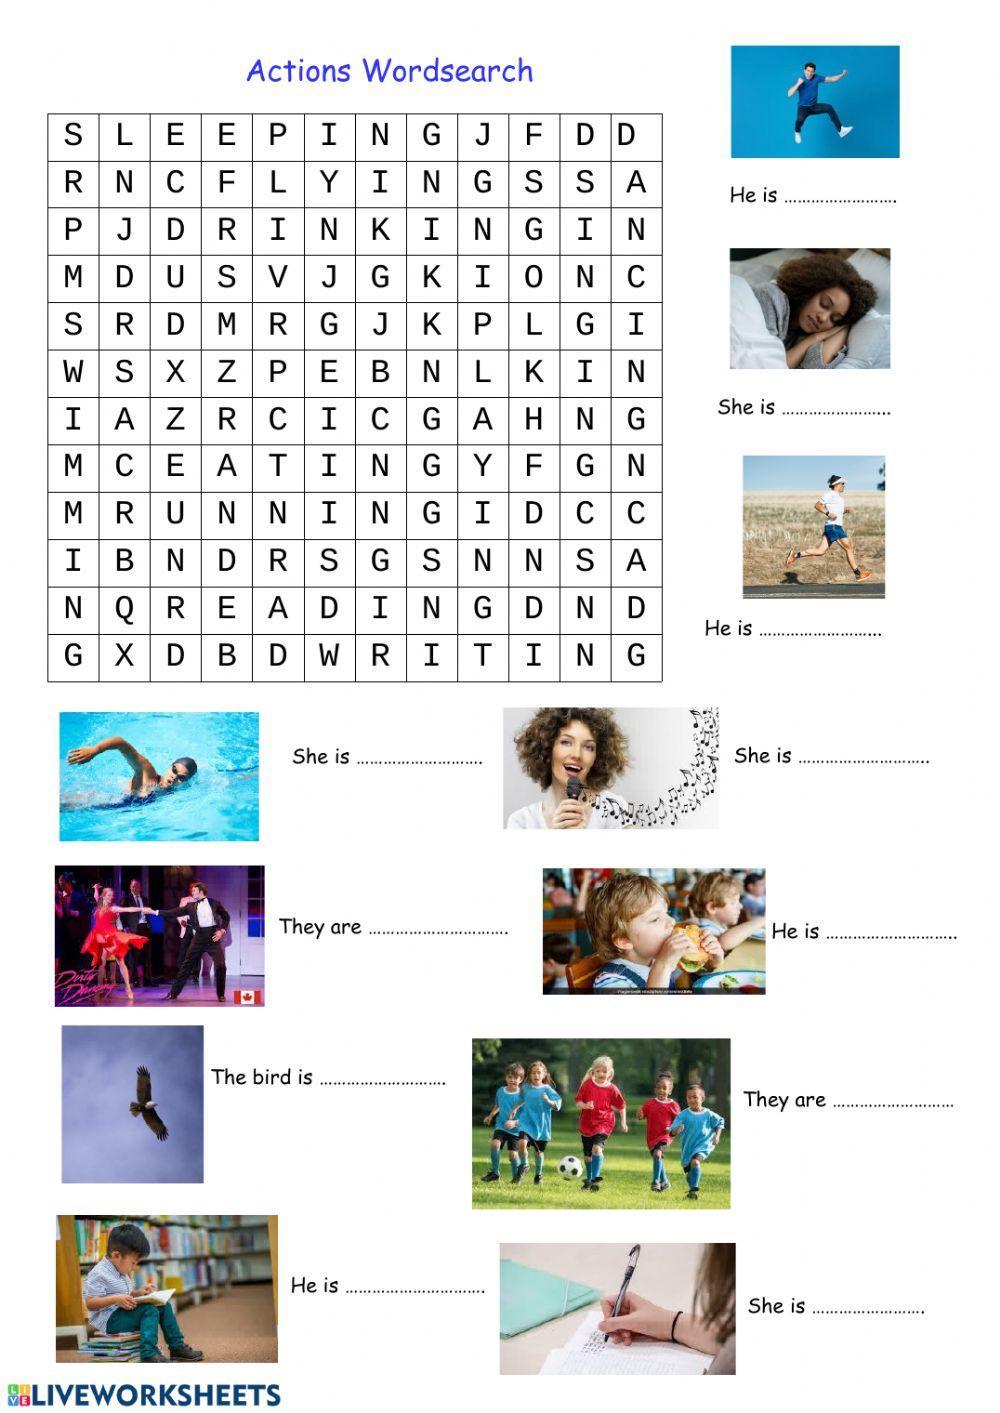 Action verbs wordsearch